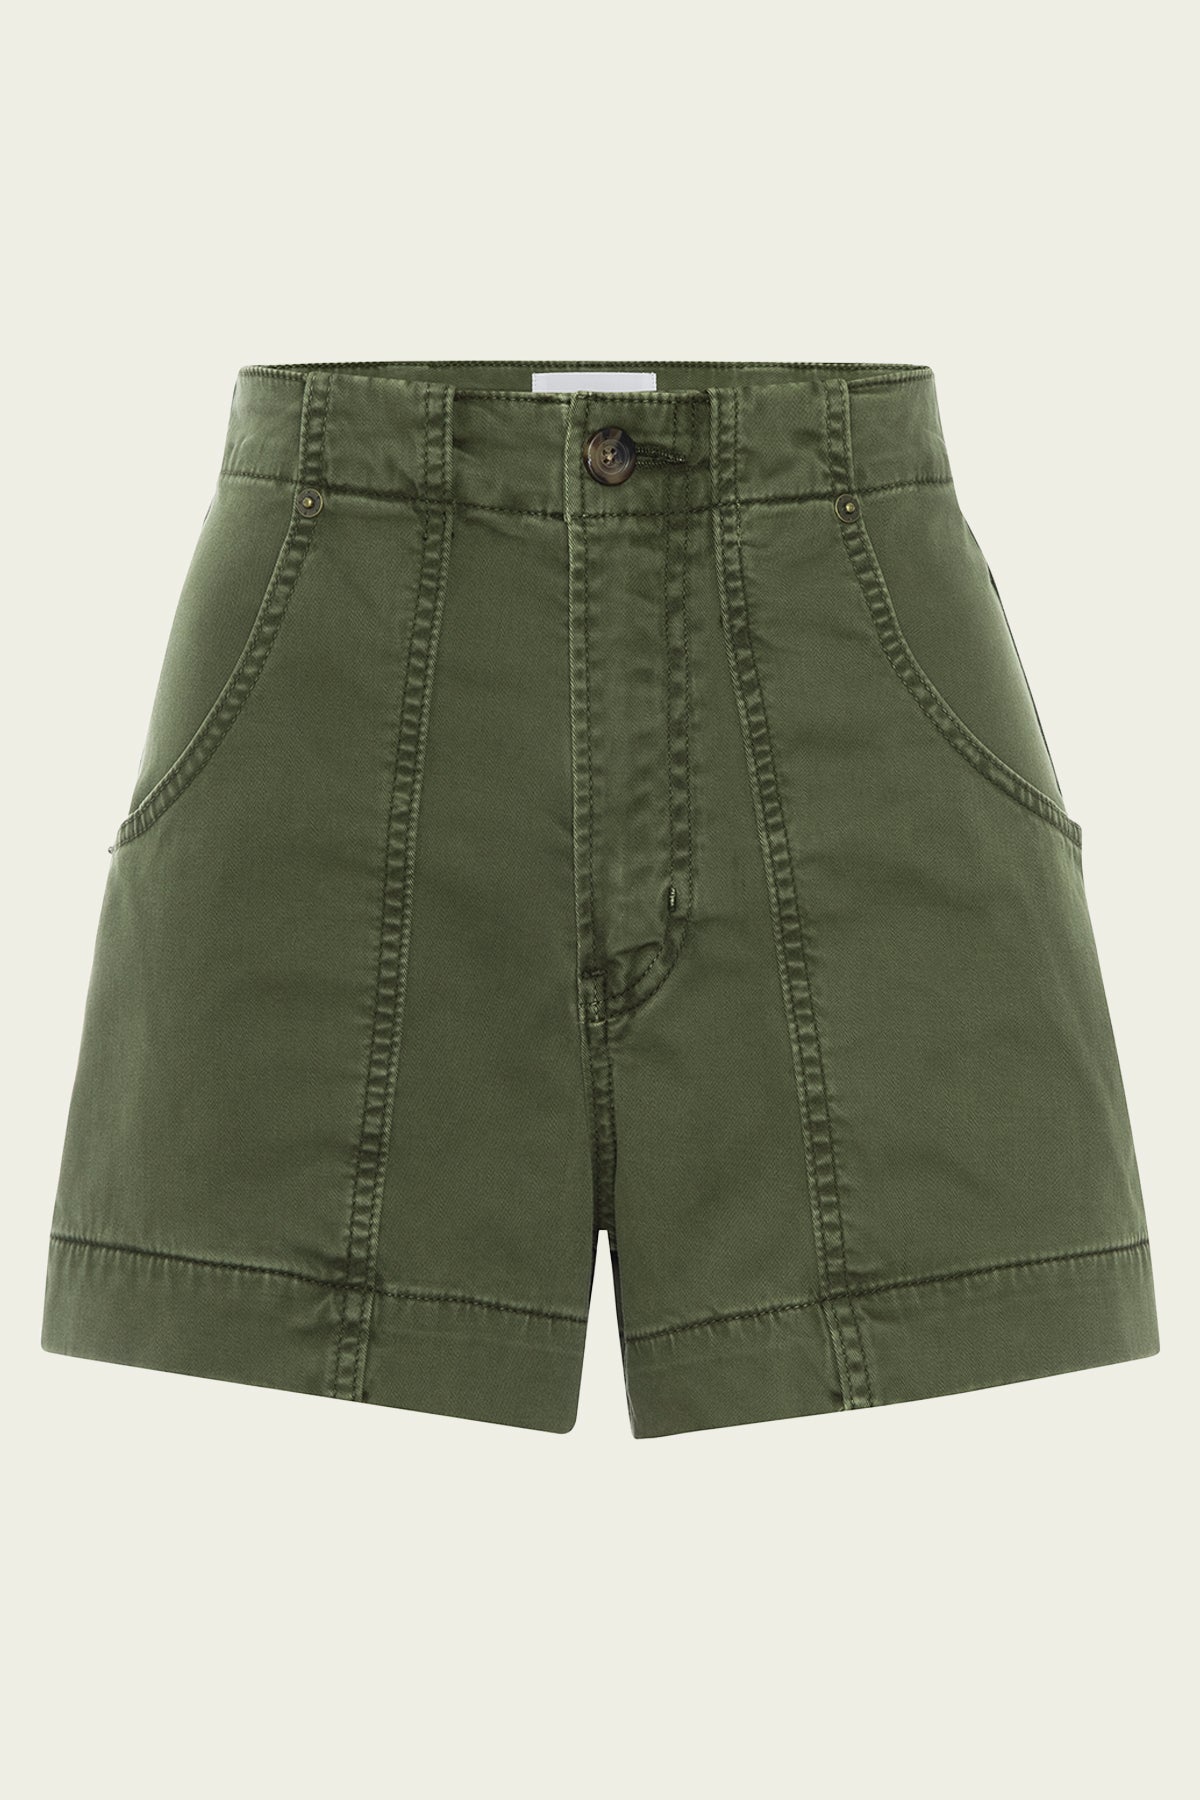 Clean Utility Short in Washed Winter Moss - shop-olivia.com